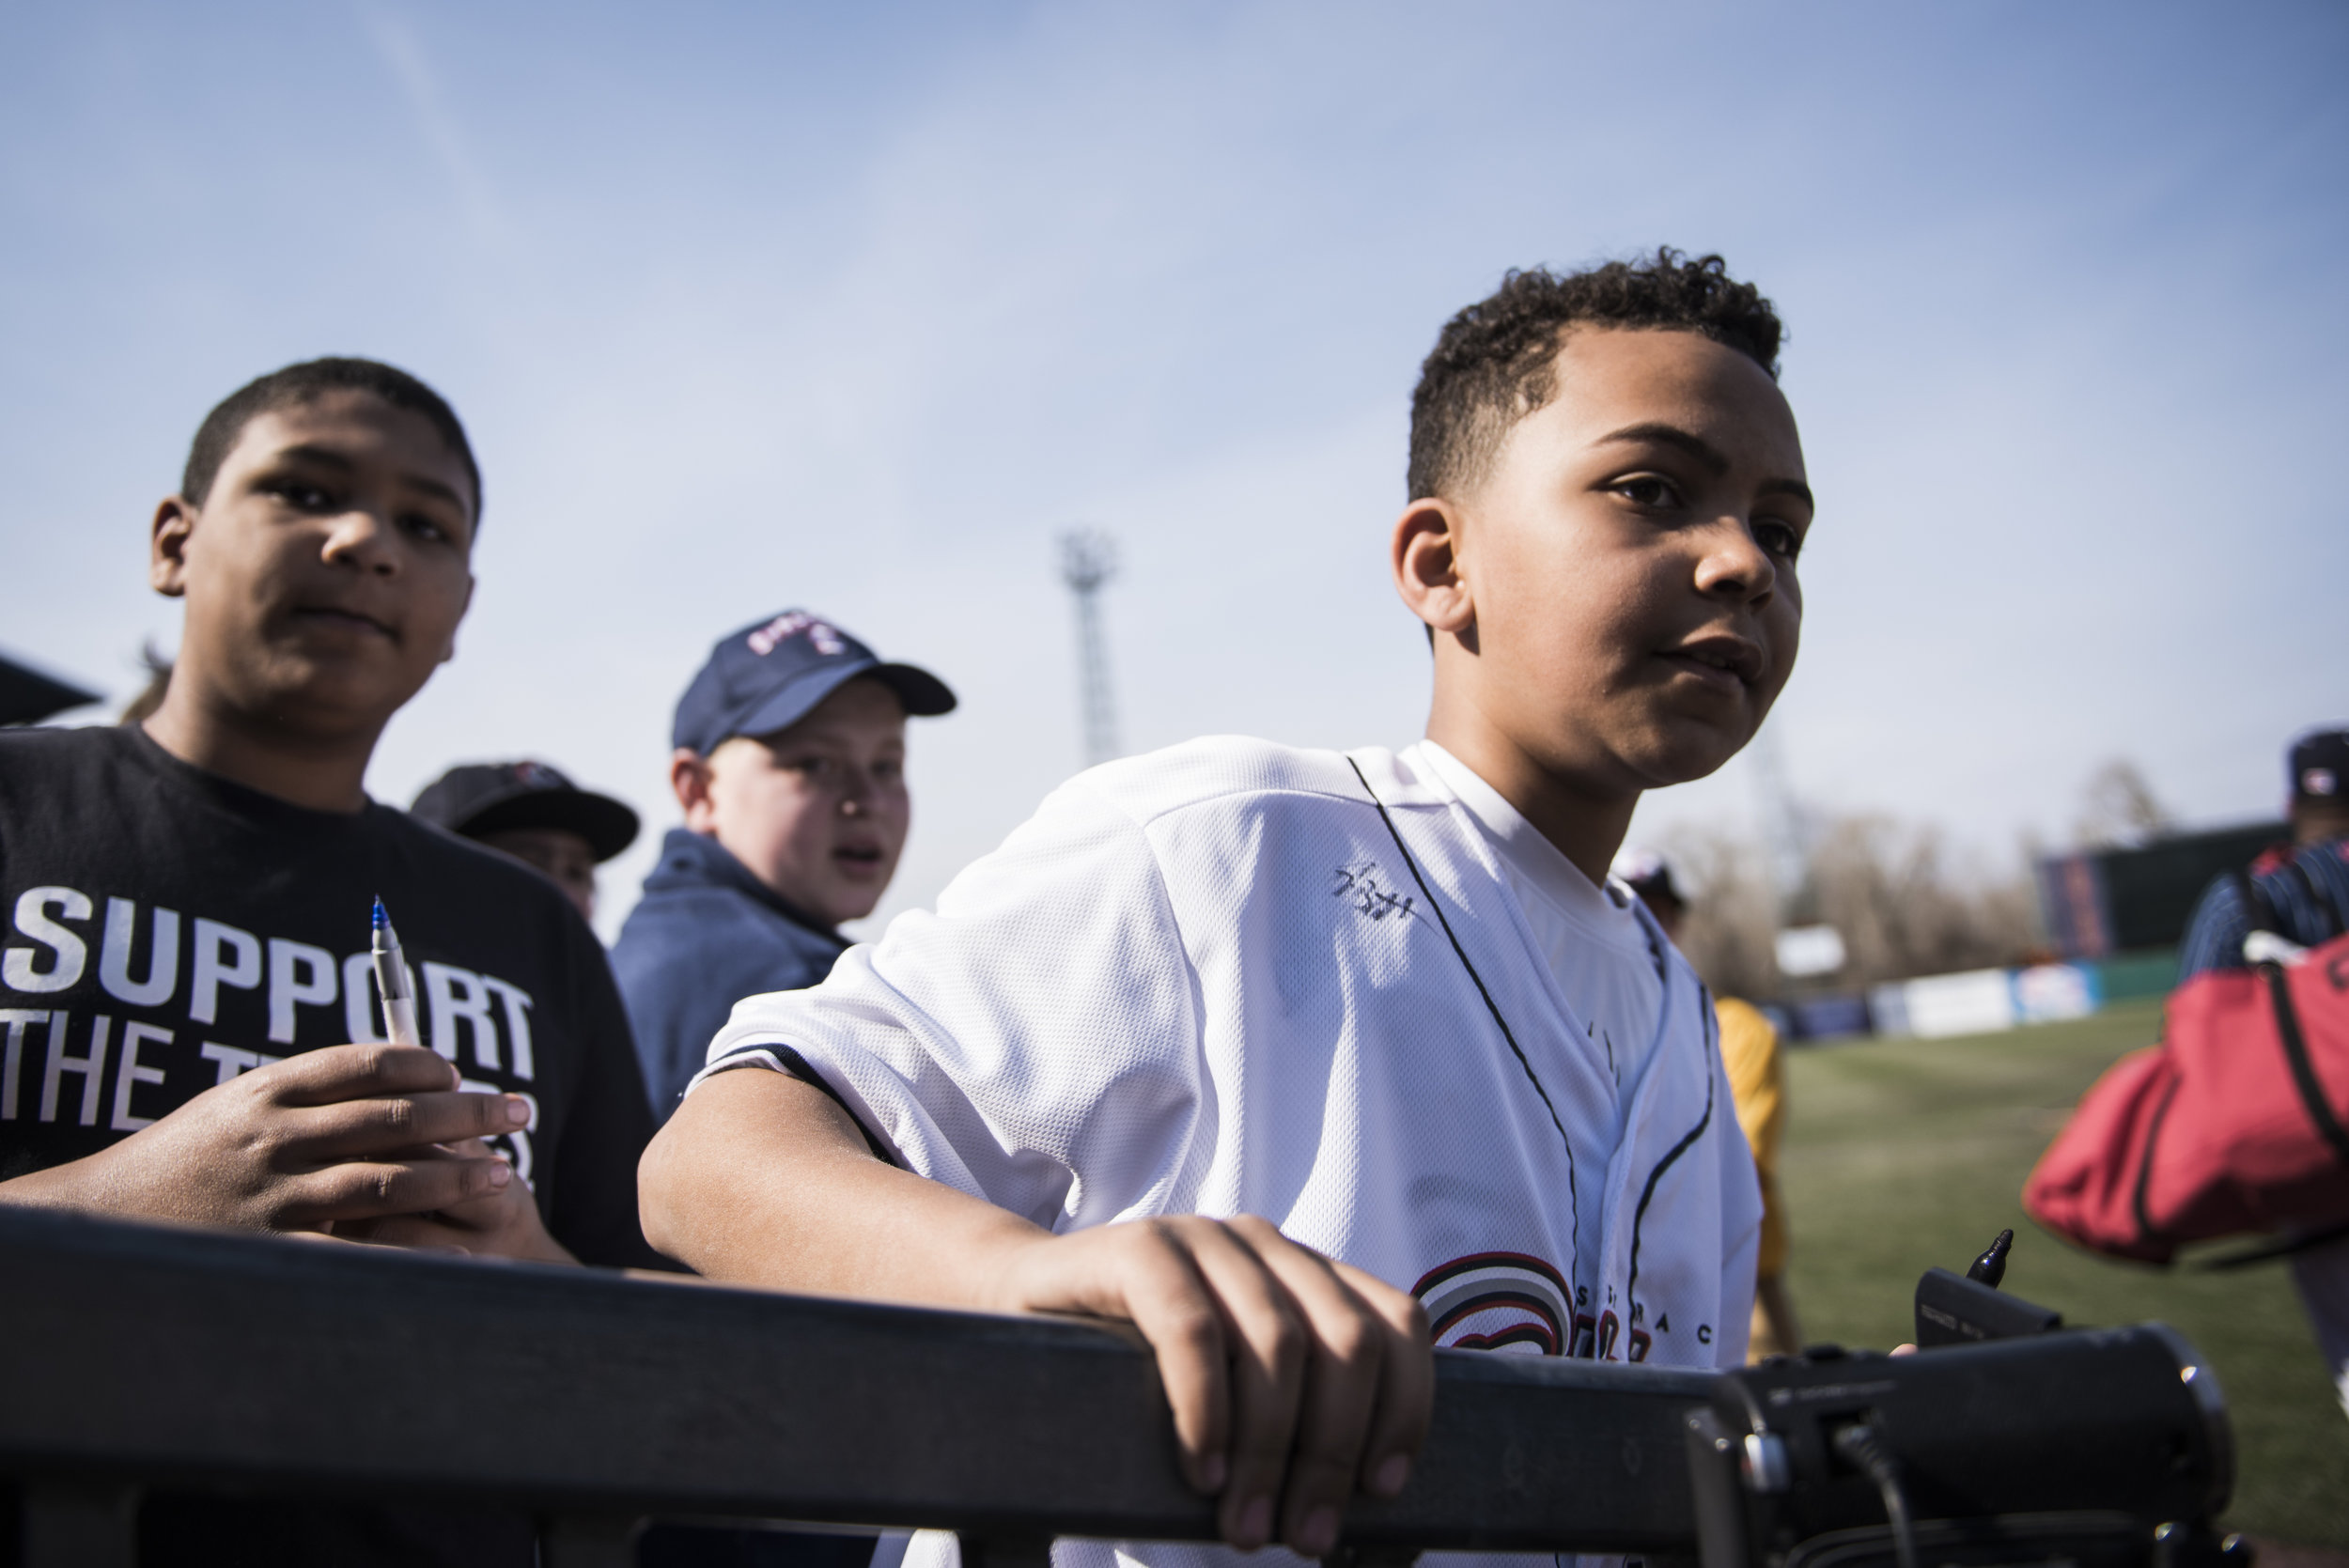  Young fans wait for Syracuse Chiefs players to come sign memorabilia ranging from old jerseys to baseball cards, before the Chiefs game against the Rochester Red Wings on April 9th, 2017. 